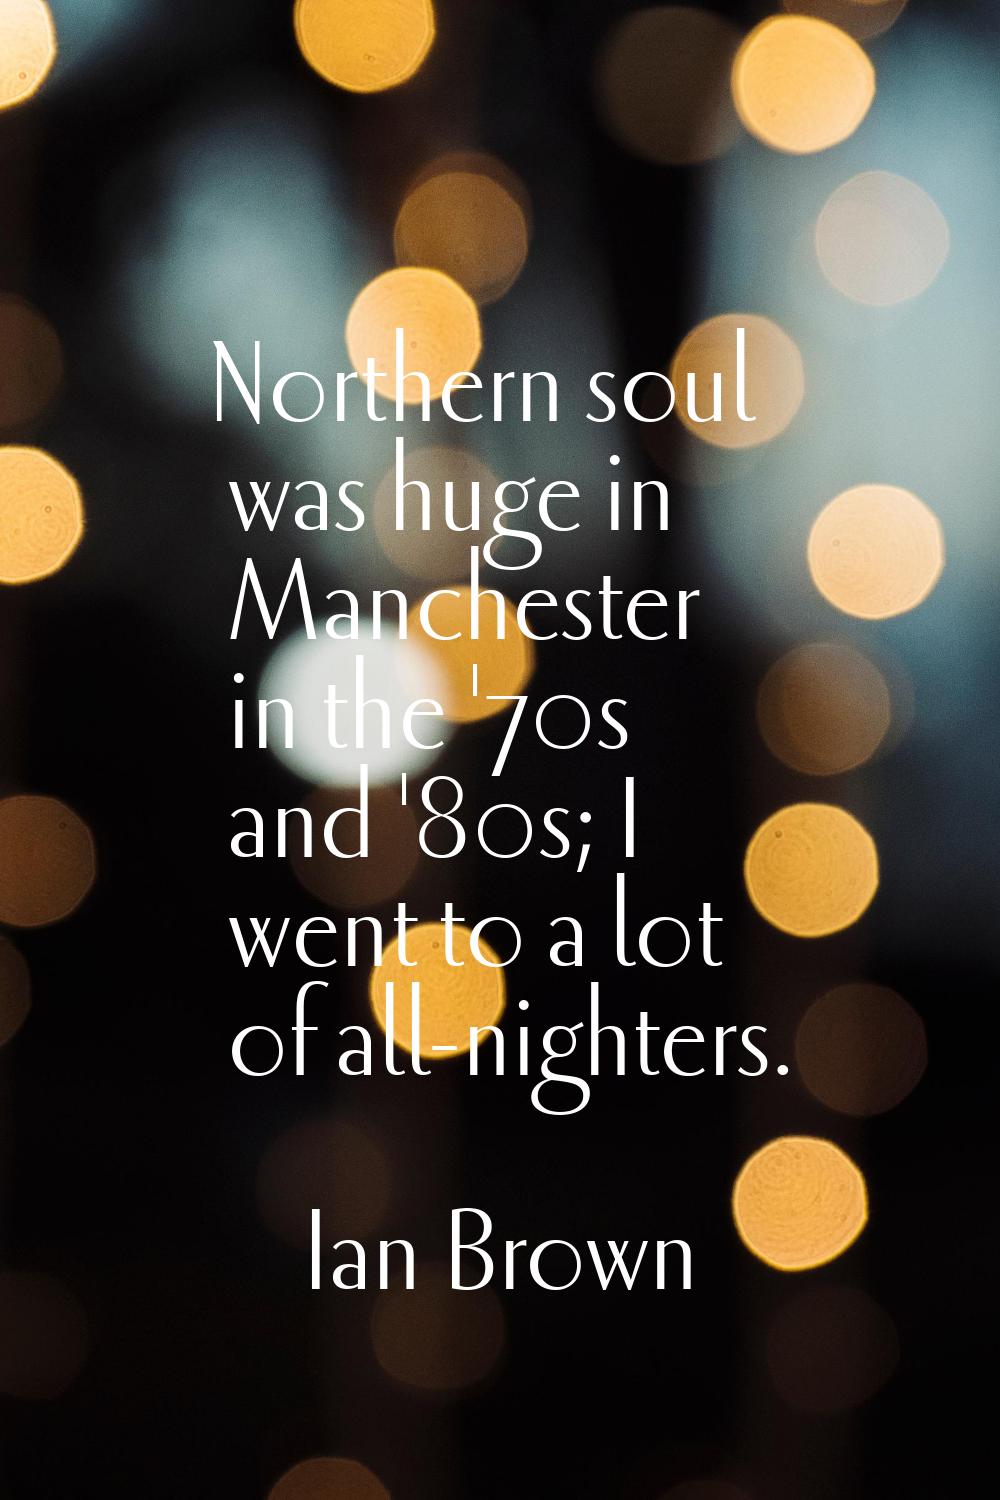 Northern soul was huge in Manchester in the '70s and '80s; I went to a lot of all-nighters.